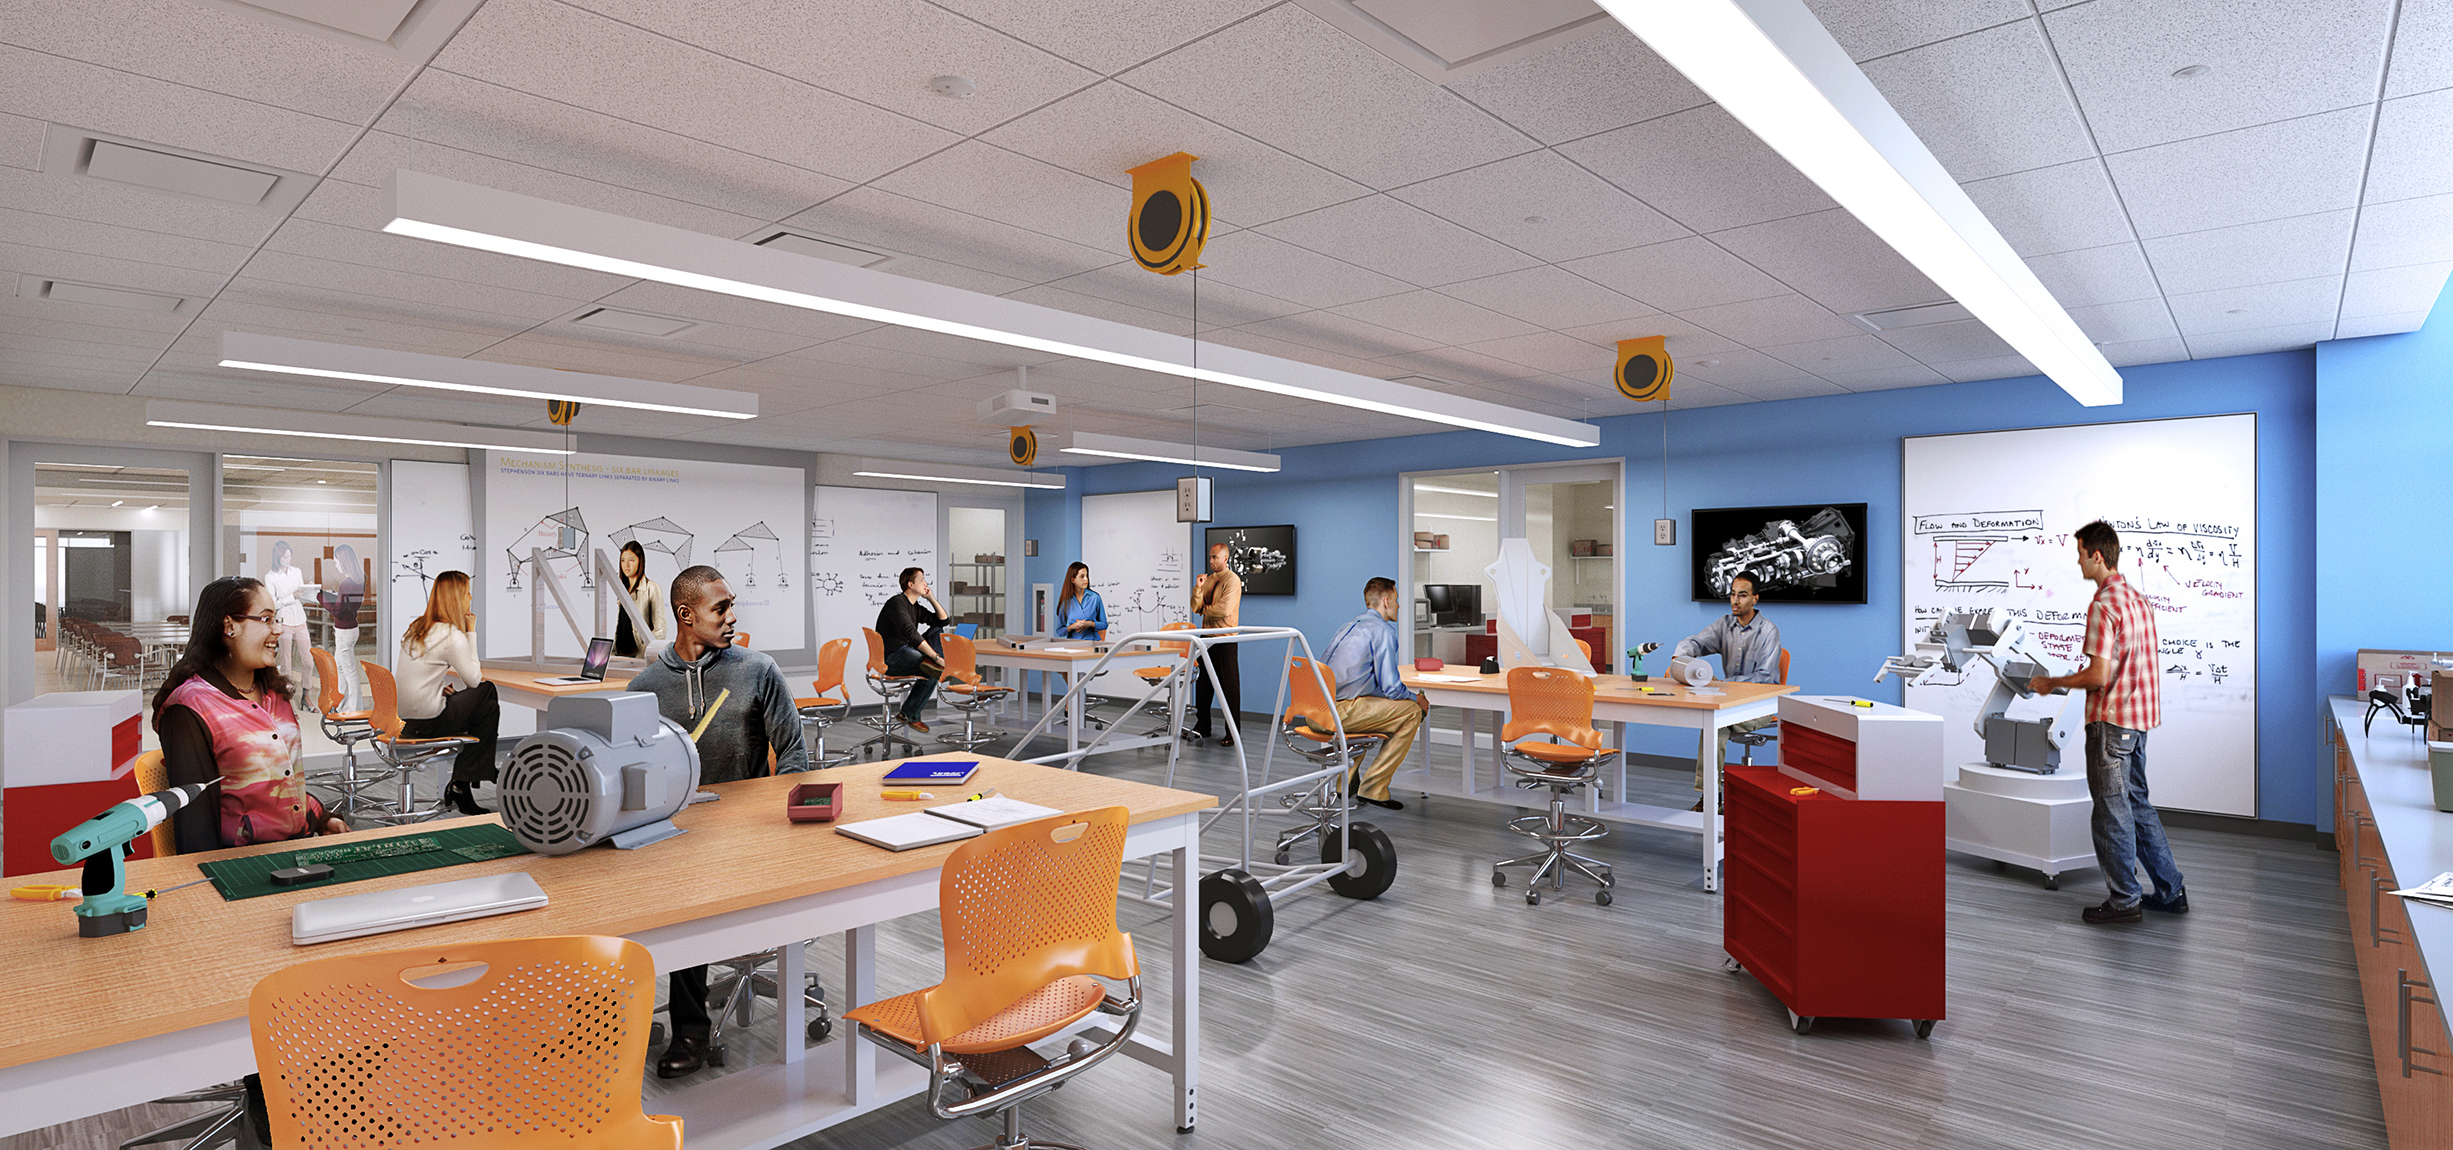 The Duff Center will include more than 50 TEAL classrooms, traditional labs and classrooms to accommodate some 2,000 students at a time. The building will be equipped with technology to support a range of teaching methods and support interactive learning.